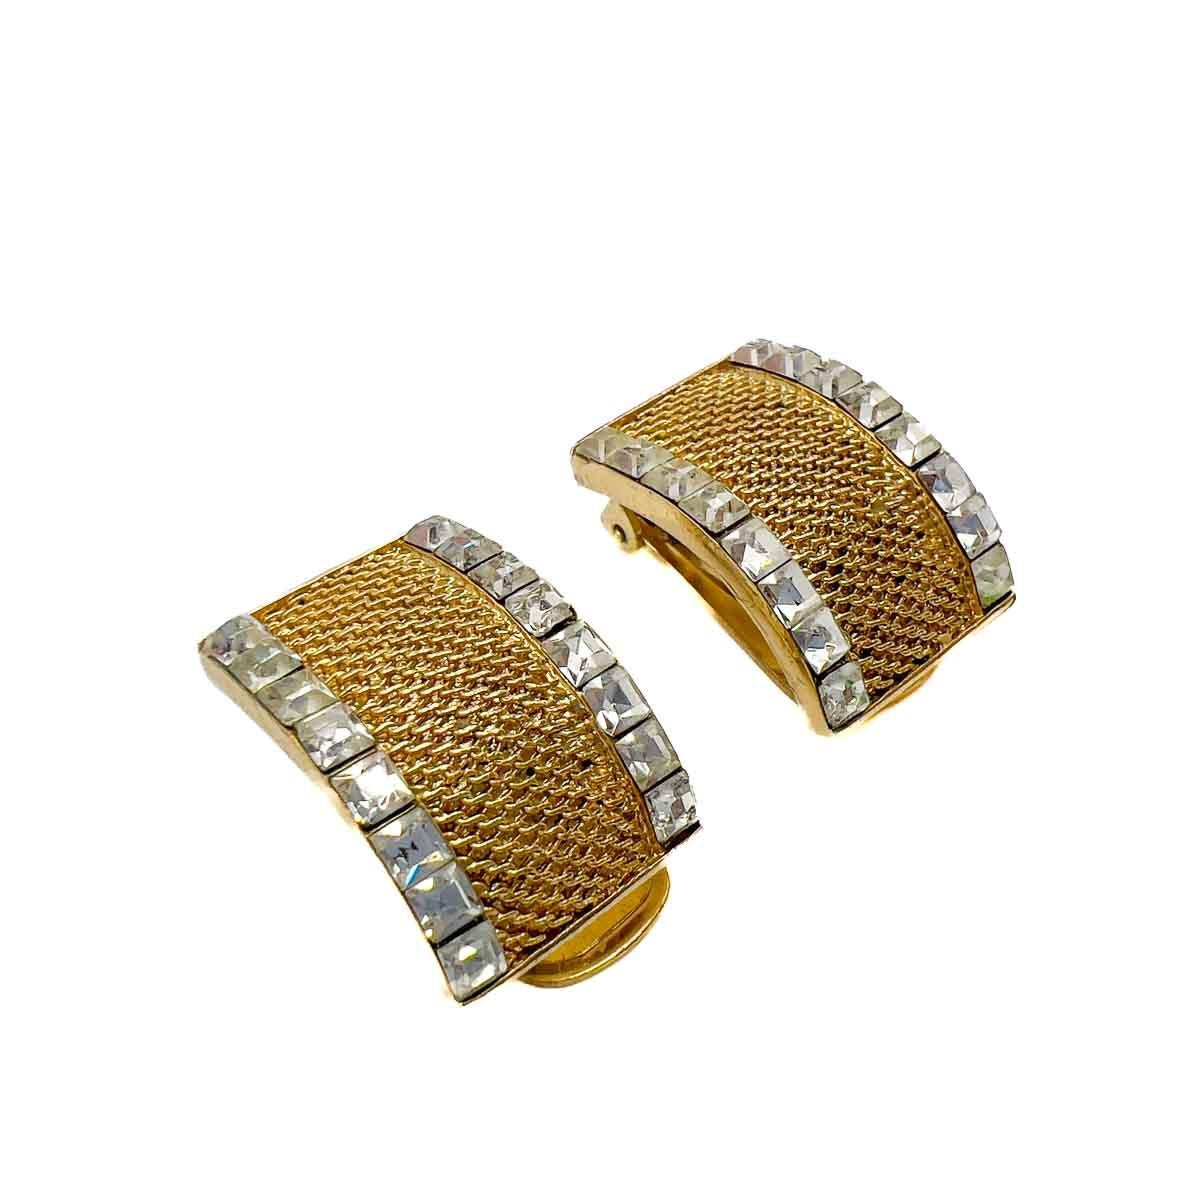 A pair of Vintage Balenciaga Crystal Mesh Earrings. Perfect structural design fulfilled with a meld of textures, these Balenciaga mesh and square cut crystal earrings are simply luscious. The ultimate in couture classics.

Balenciaga is world